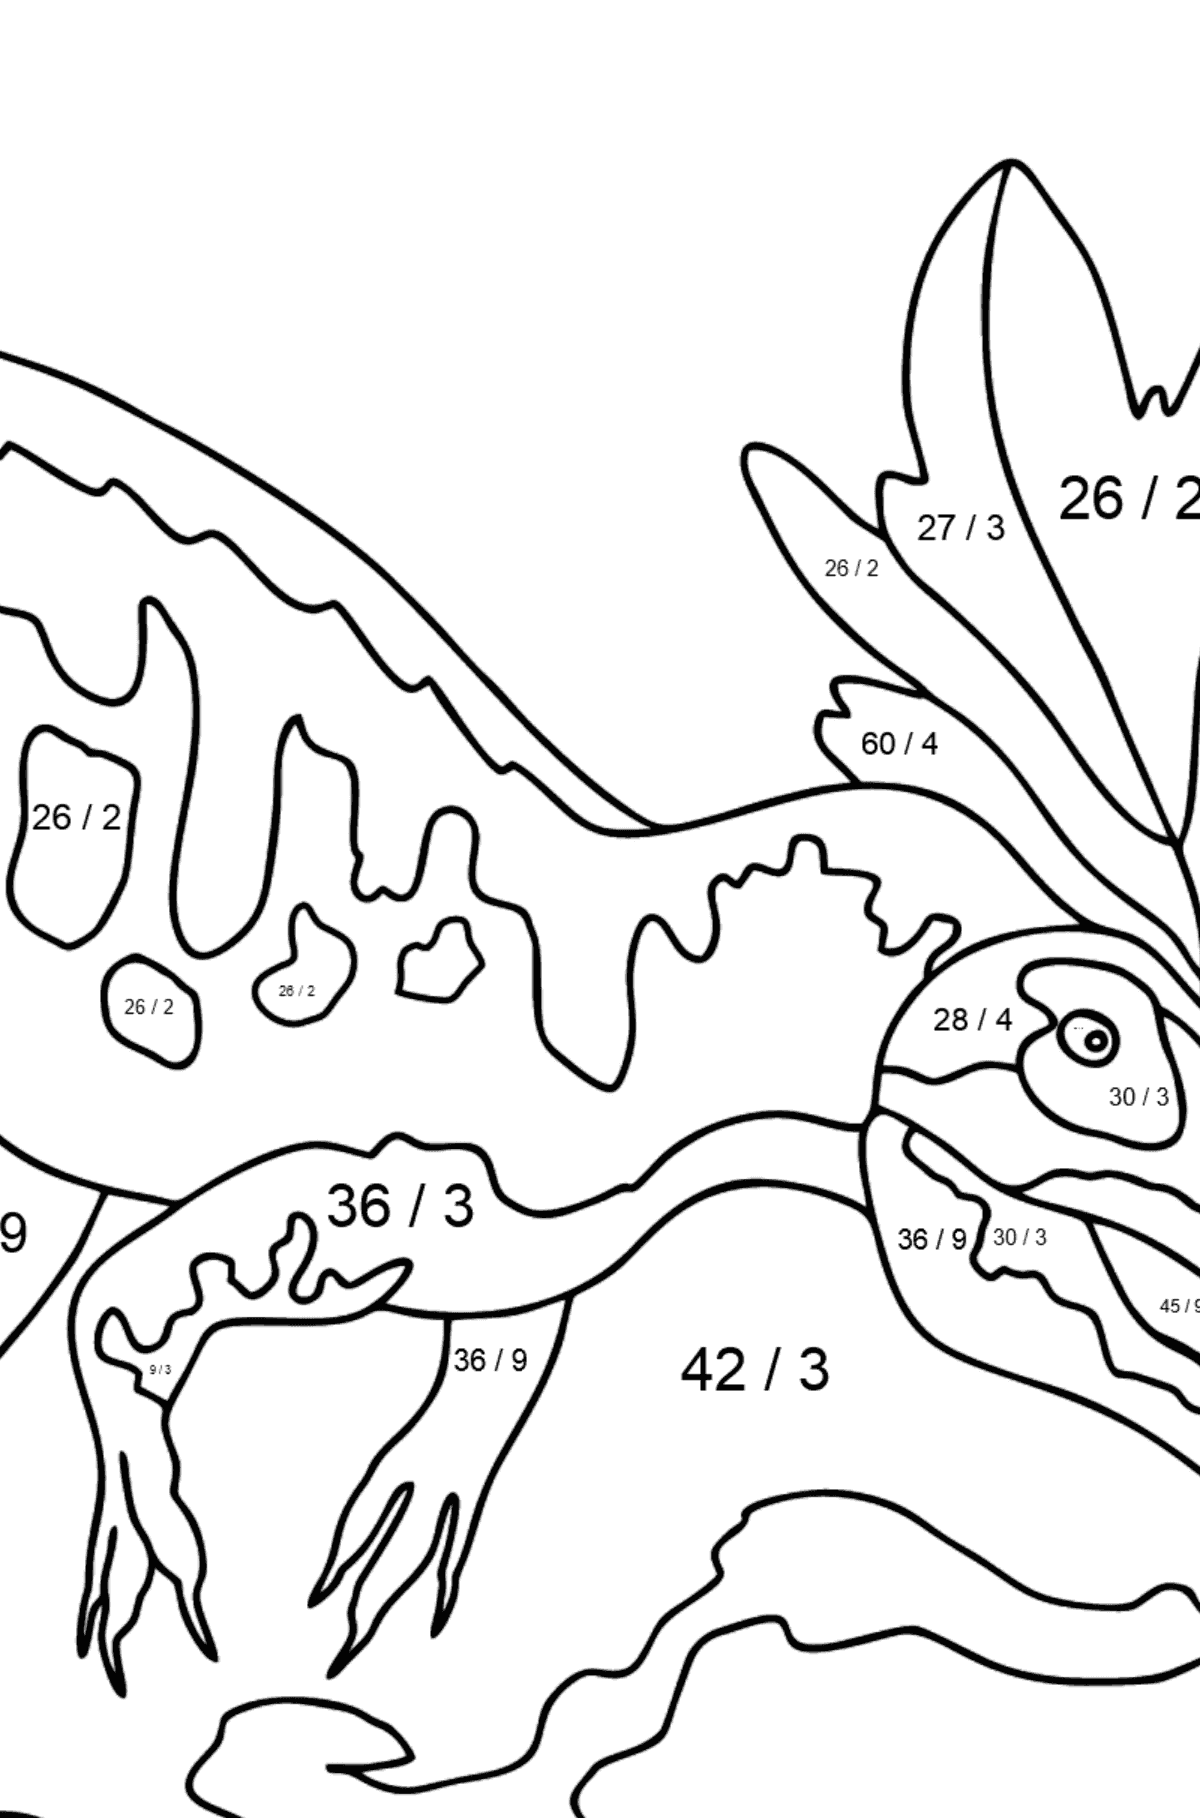 Coloring Page - Allosaurus - A Well-Researched Dinosaur - Math Coloring - Division for Kids